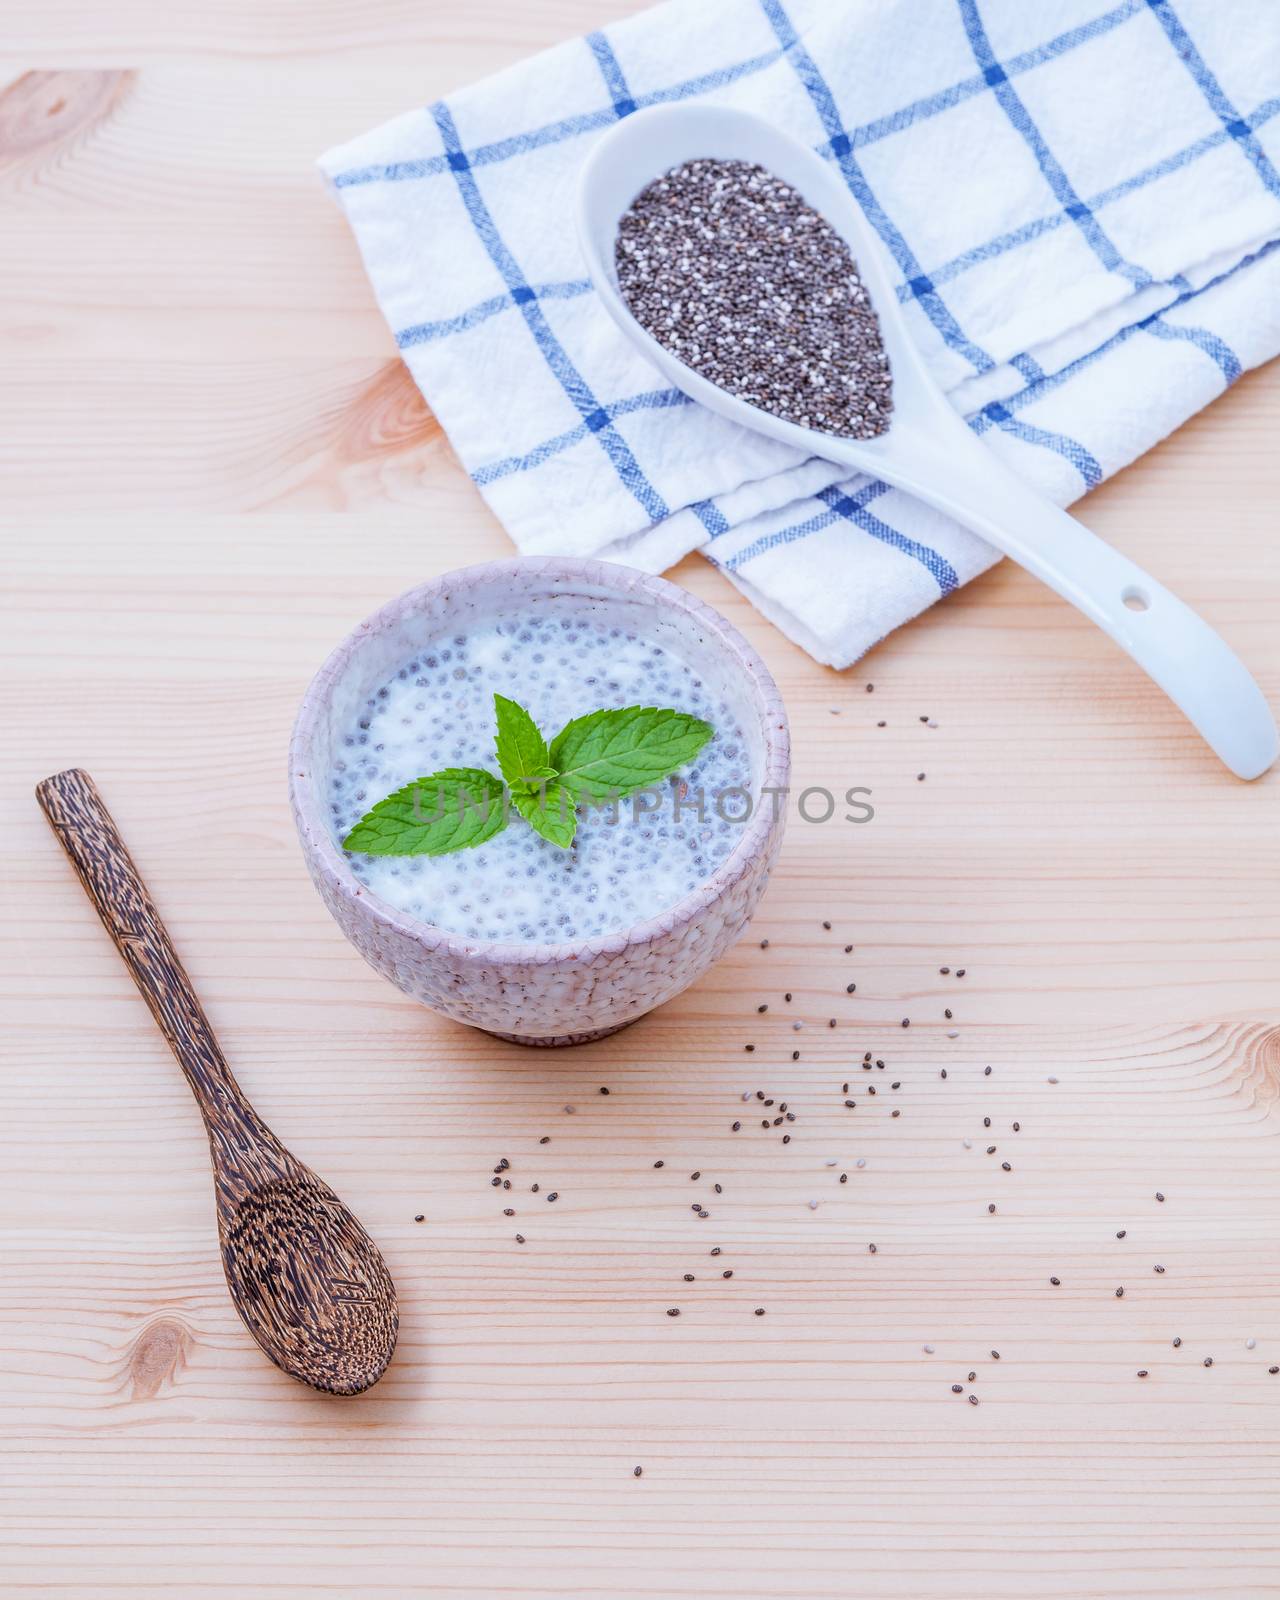 Nutritious chia seeds in ceramic bowl with wooden spoon for diet food ingredients setup on wooden background . shallow depth of field.